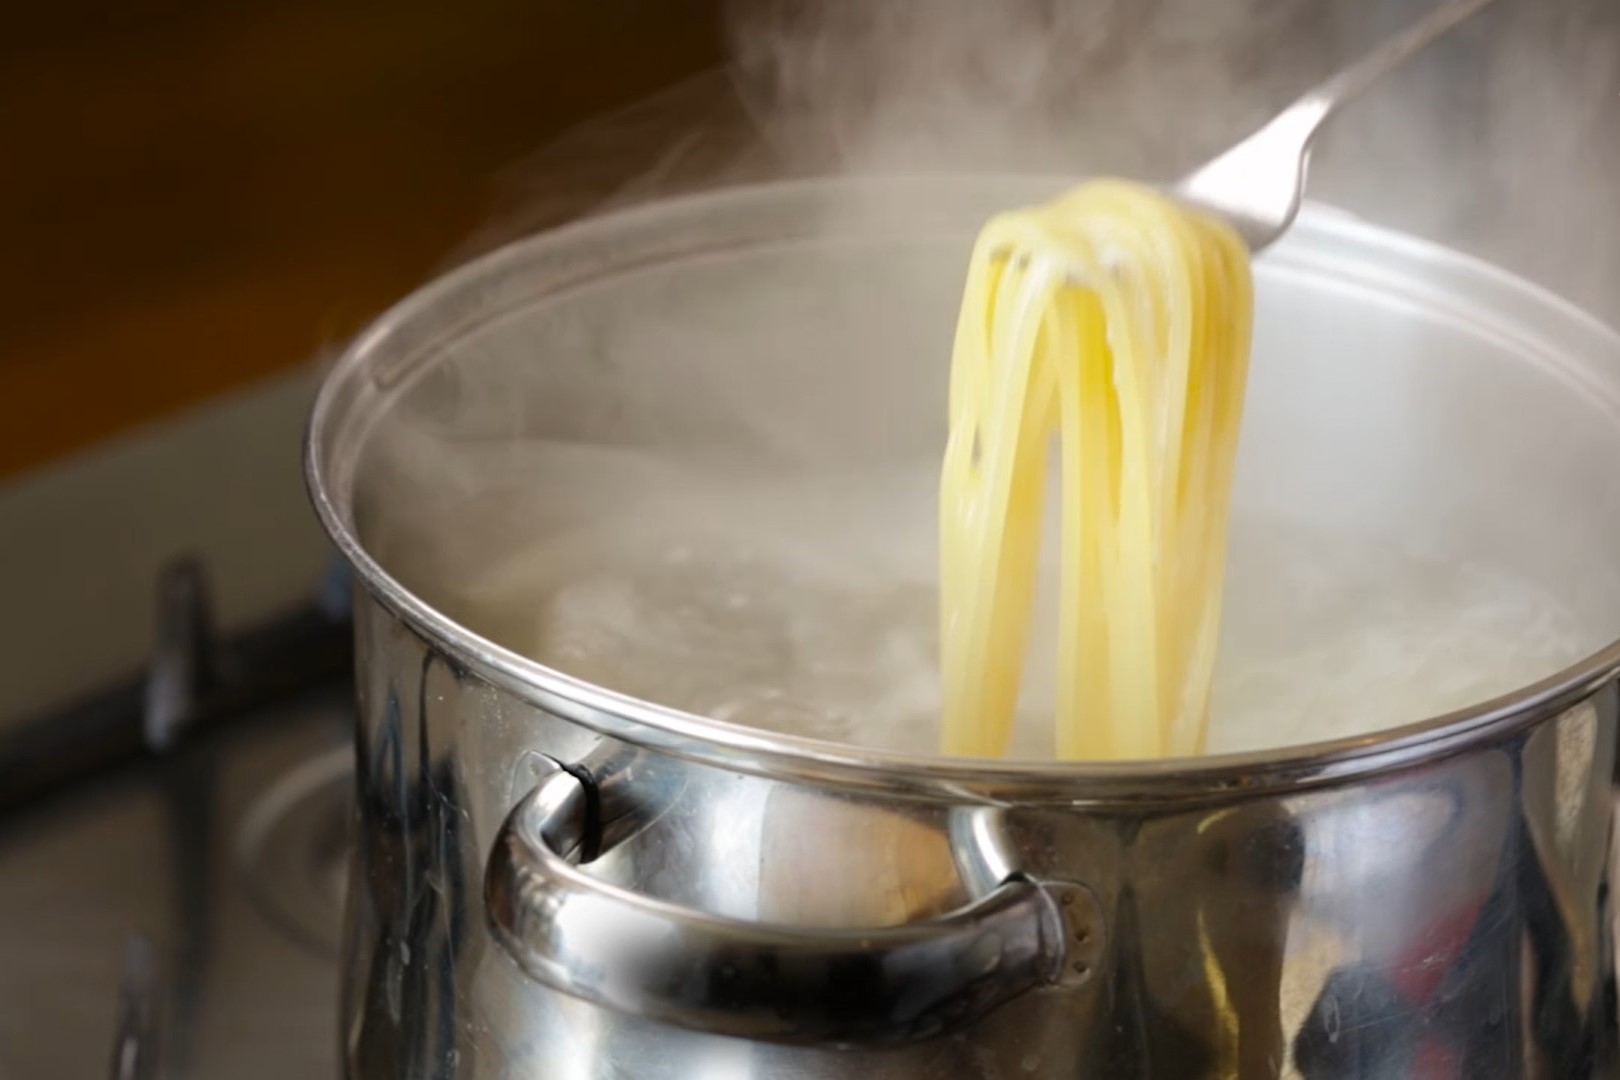 How To Determine When Pasta Is Cooked To Perfection